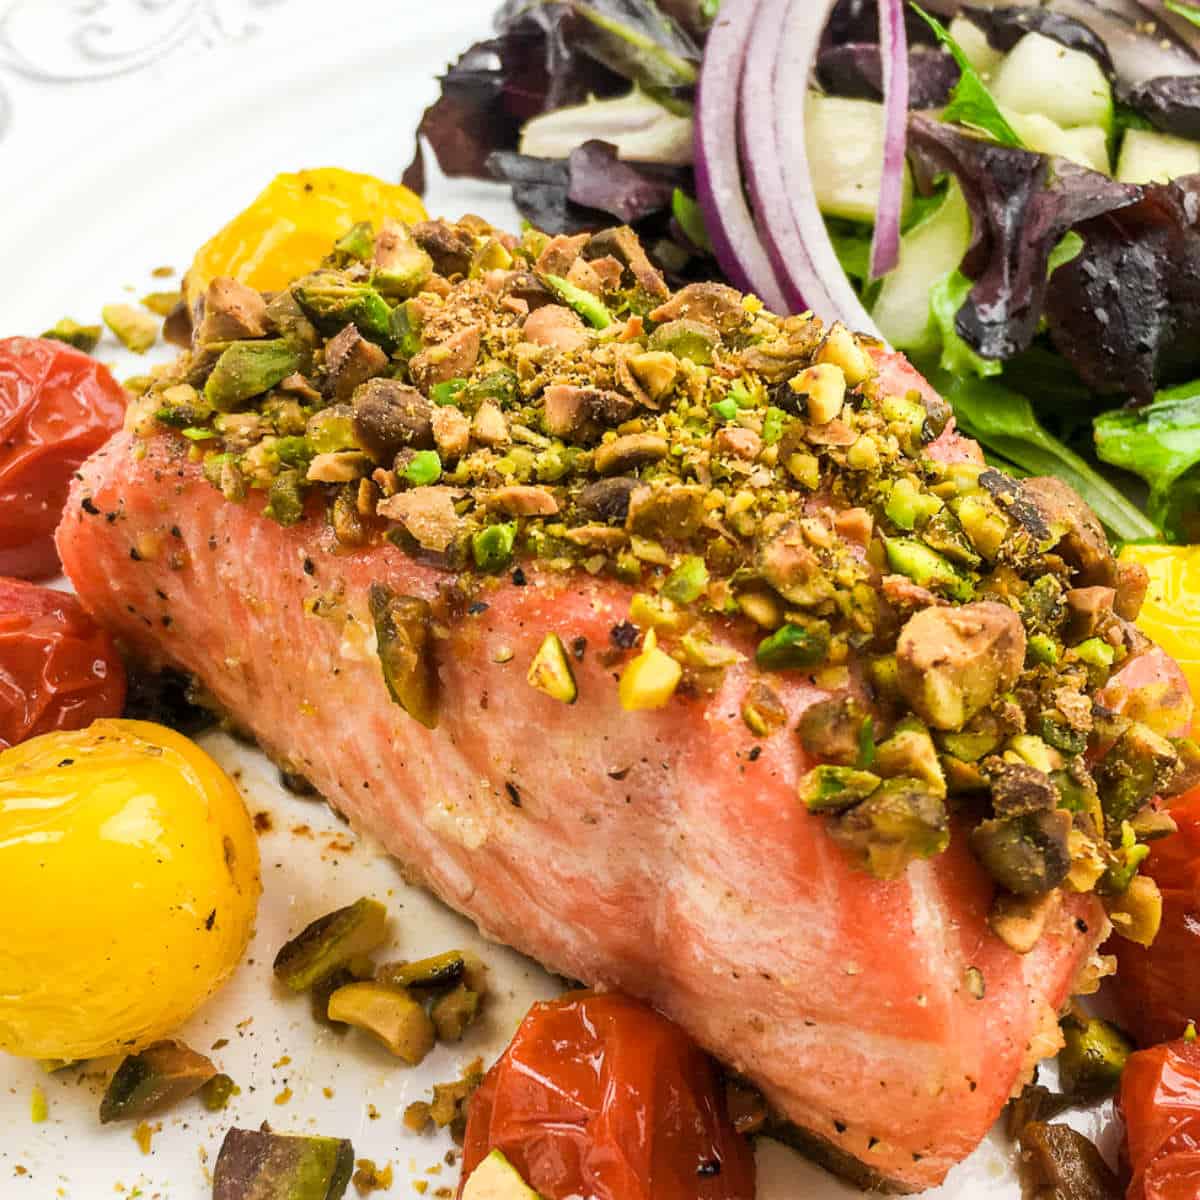 plate with pistachio crusted salmon and blistered tomatoes.